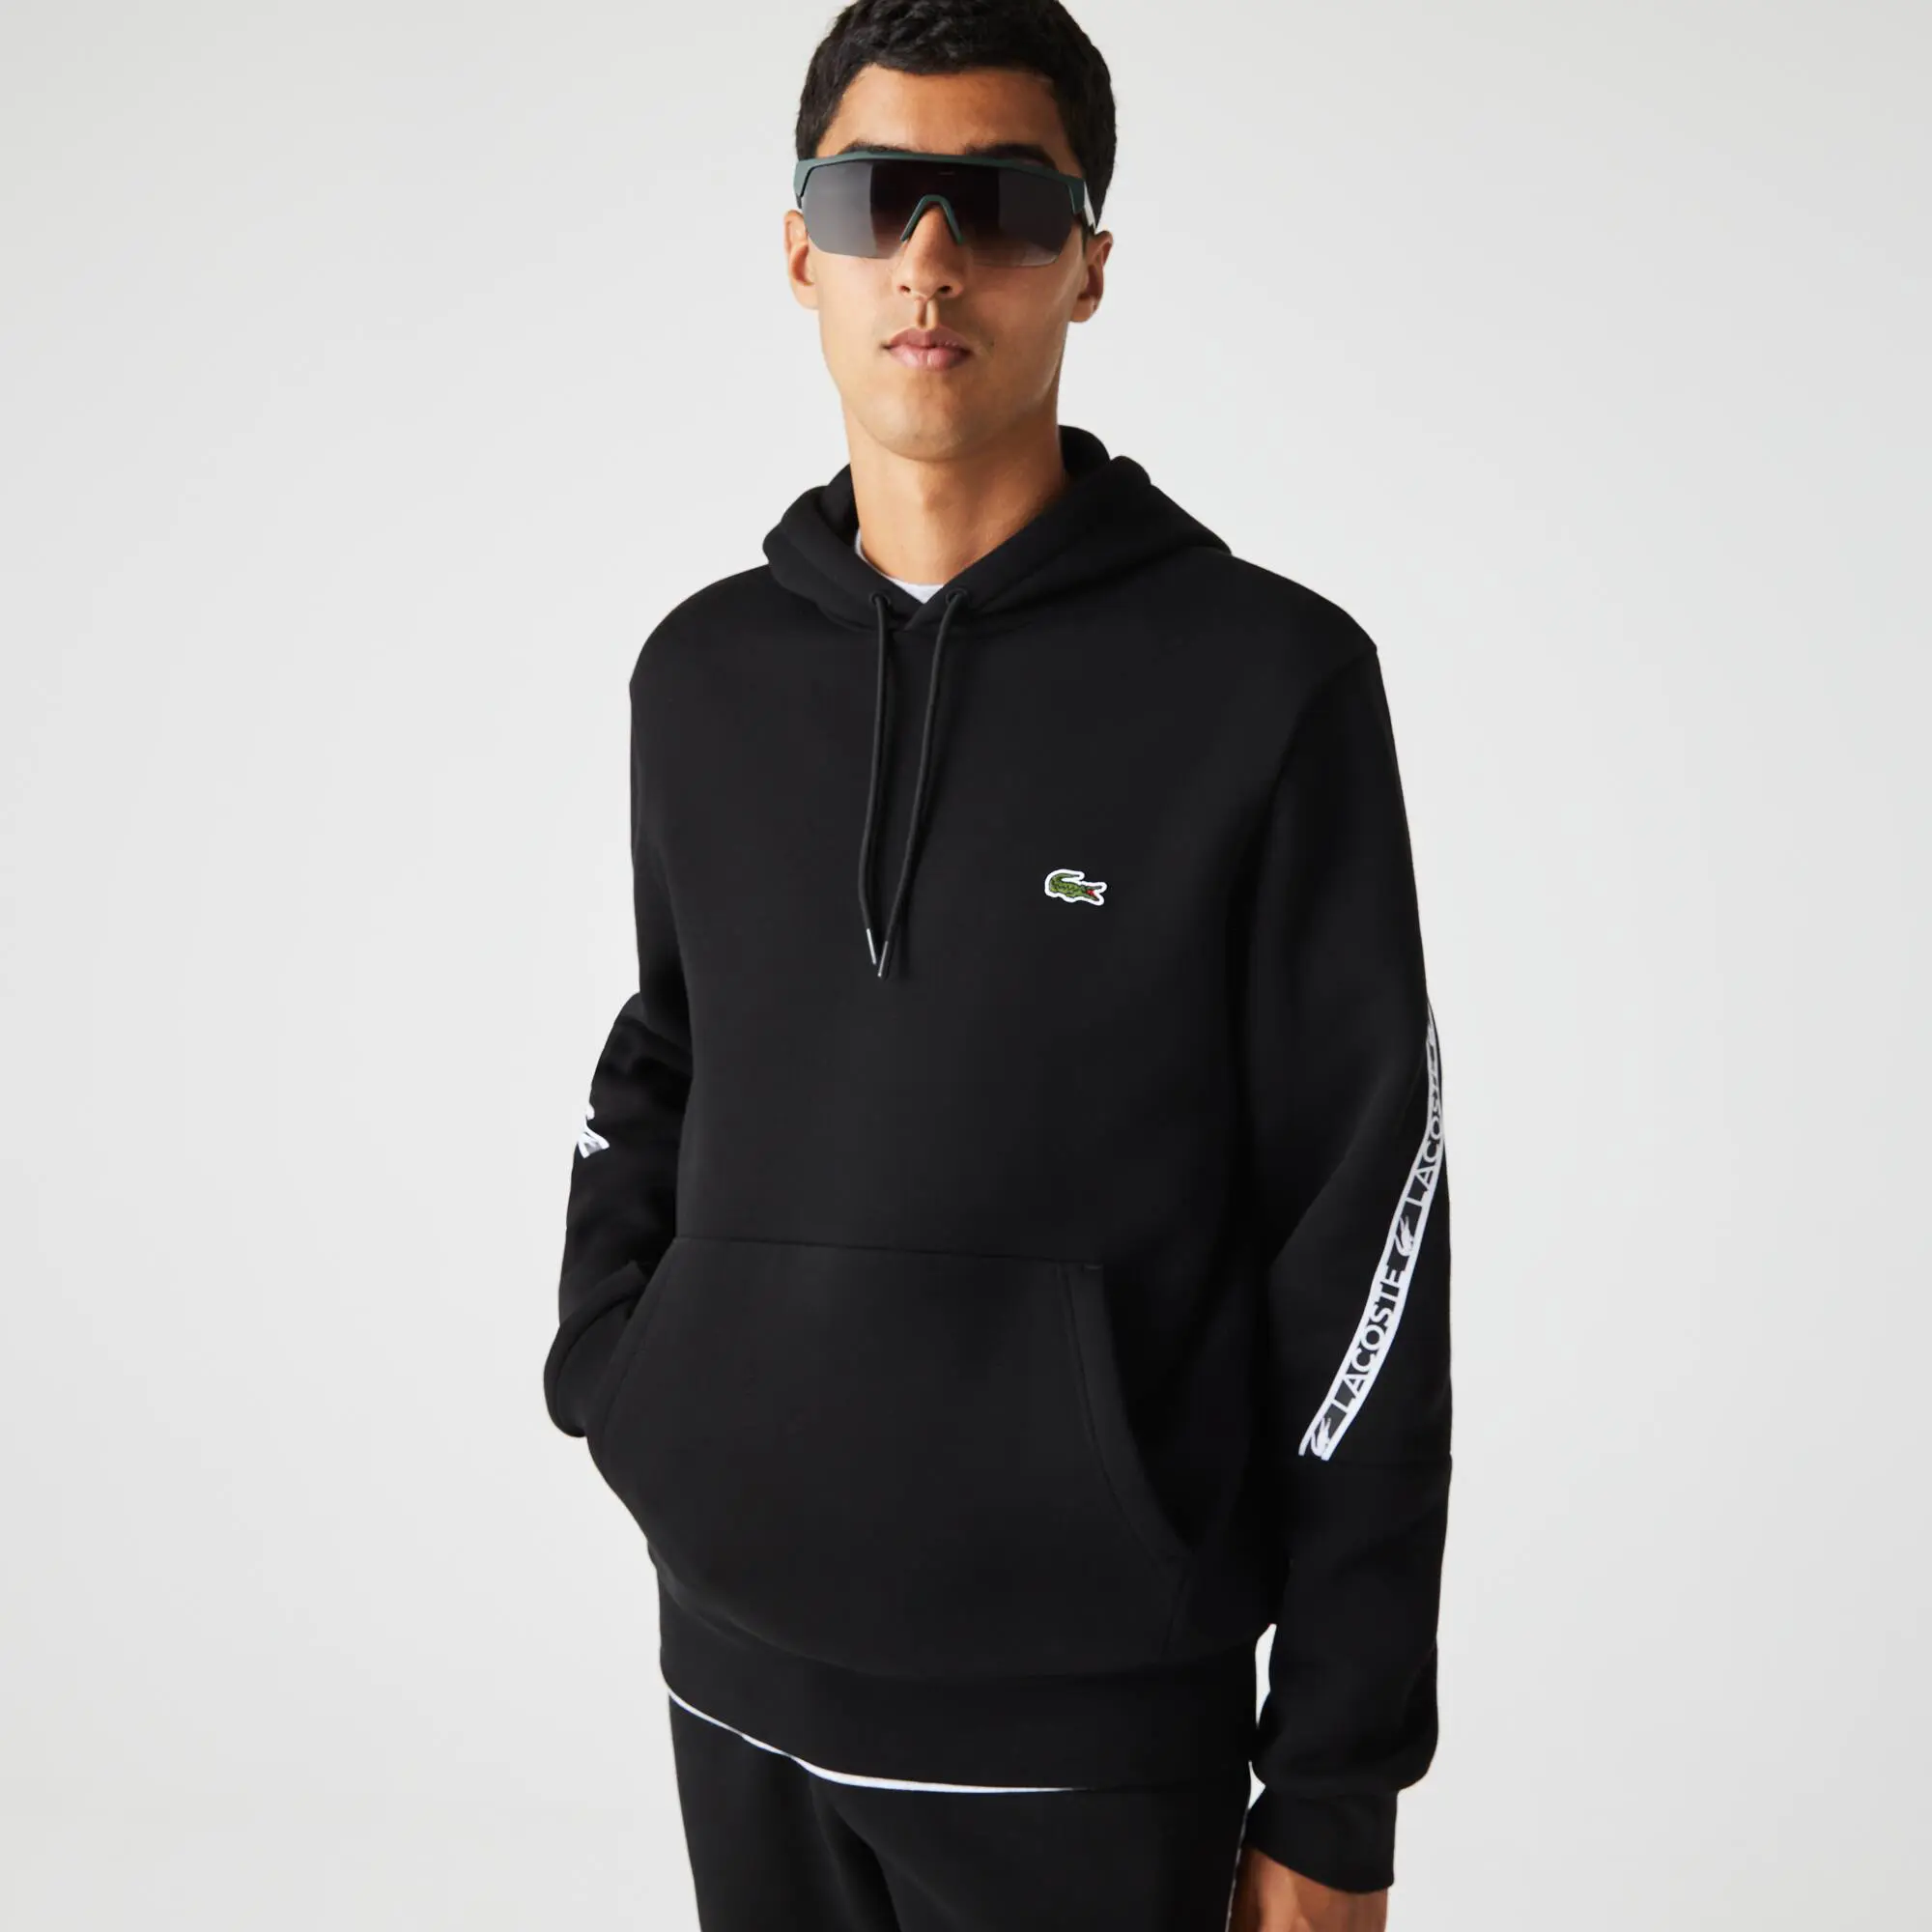 Lacoste Men's Lacoste Classic Fit Printed Bands Hooded Sweatshirt. 1